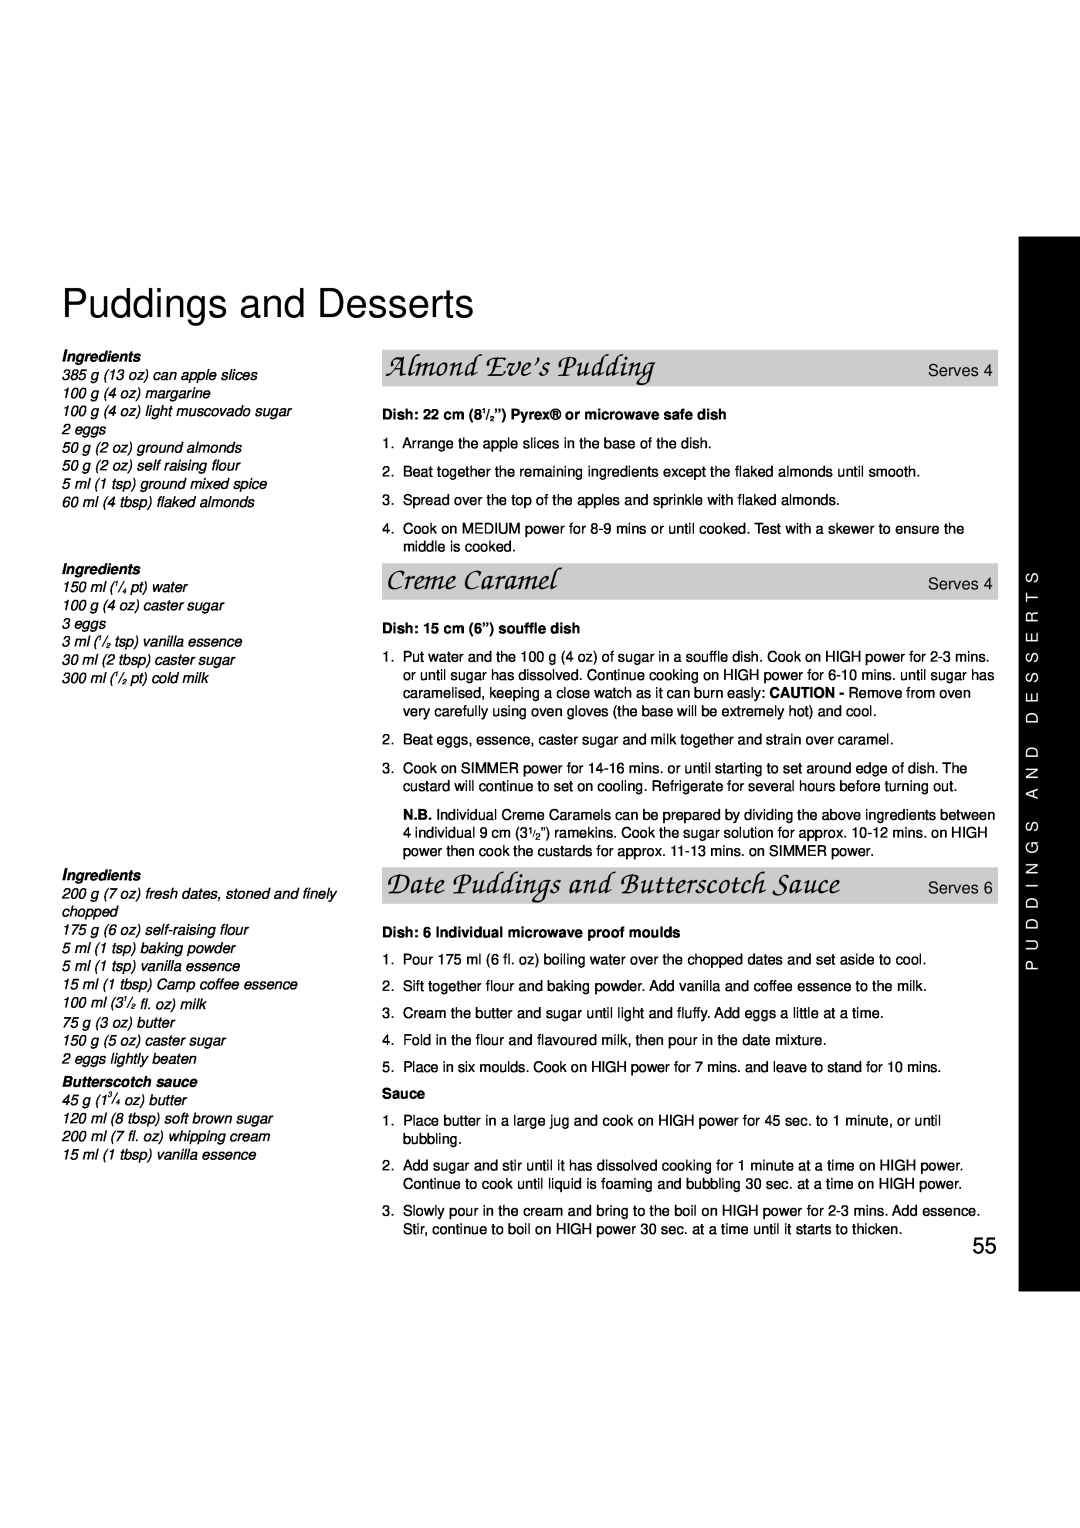 Creda MBO55 Puddings and Desserts, Almond Eve’s Pudding, Creme Caramel, Date Puddings and Butterscotch Sauce, Ingredients 